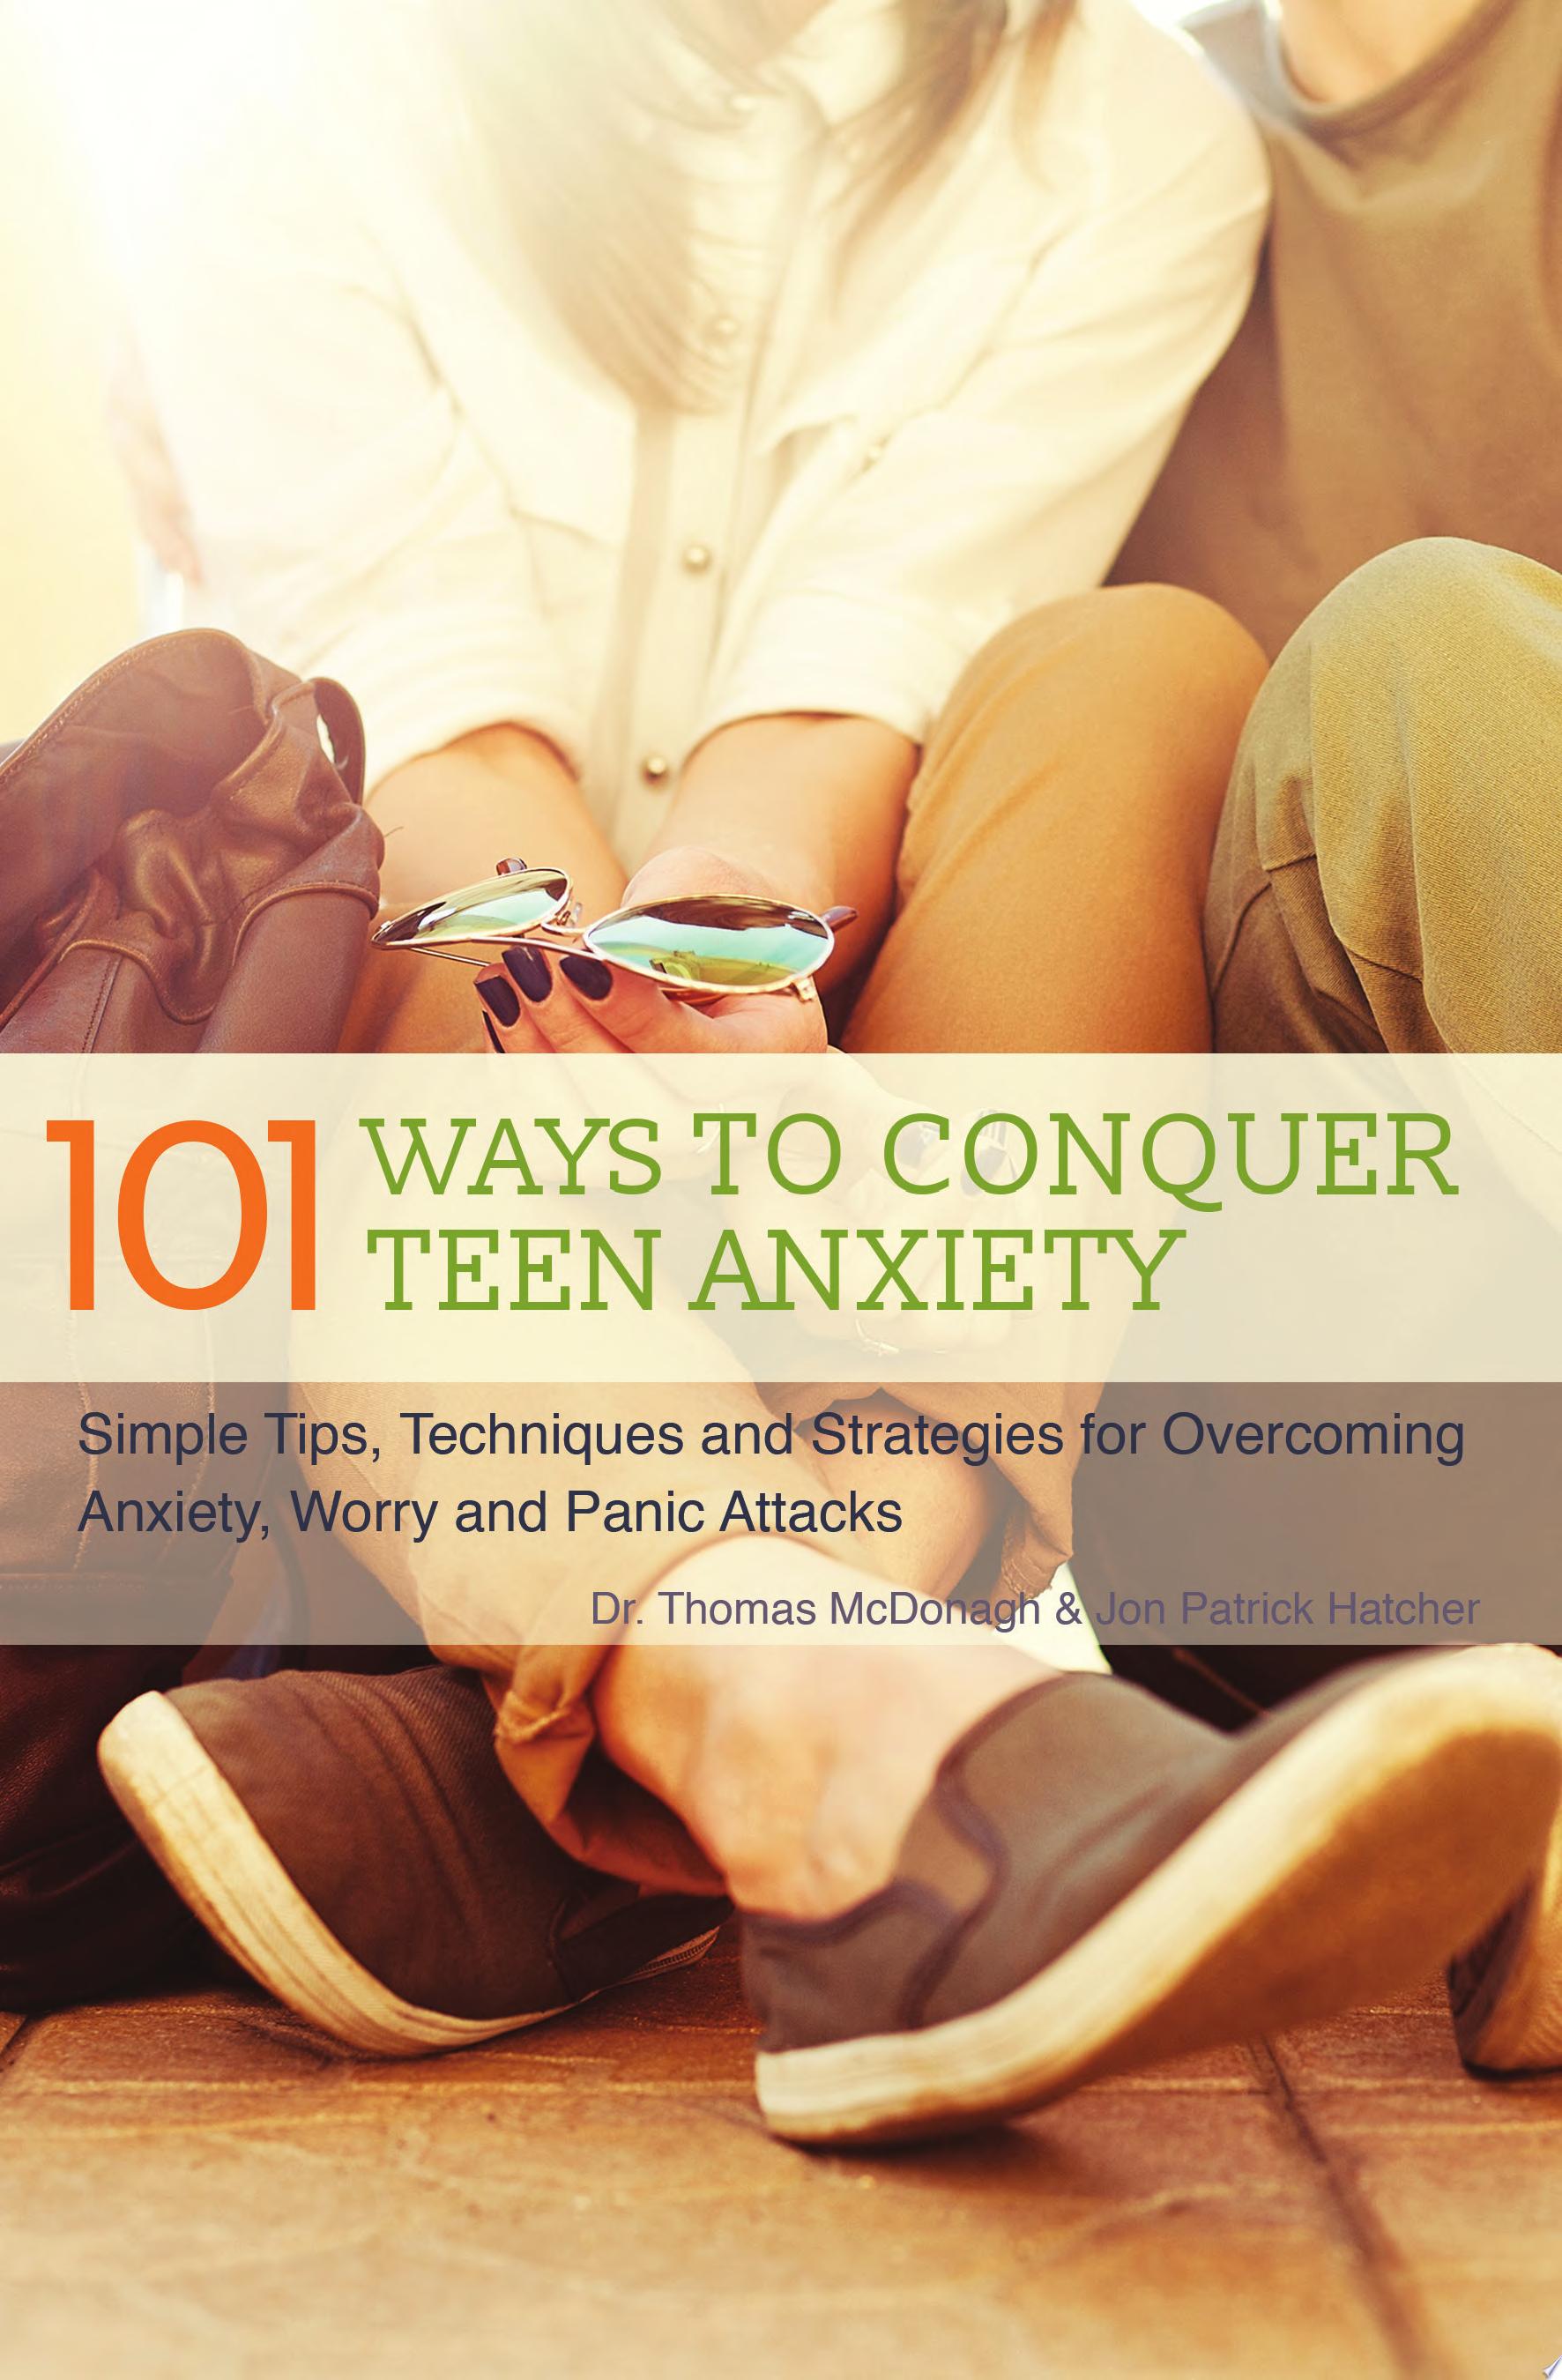 Image for "101 Ways to Conquer Teen Anxiety"